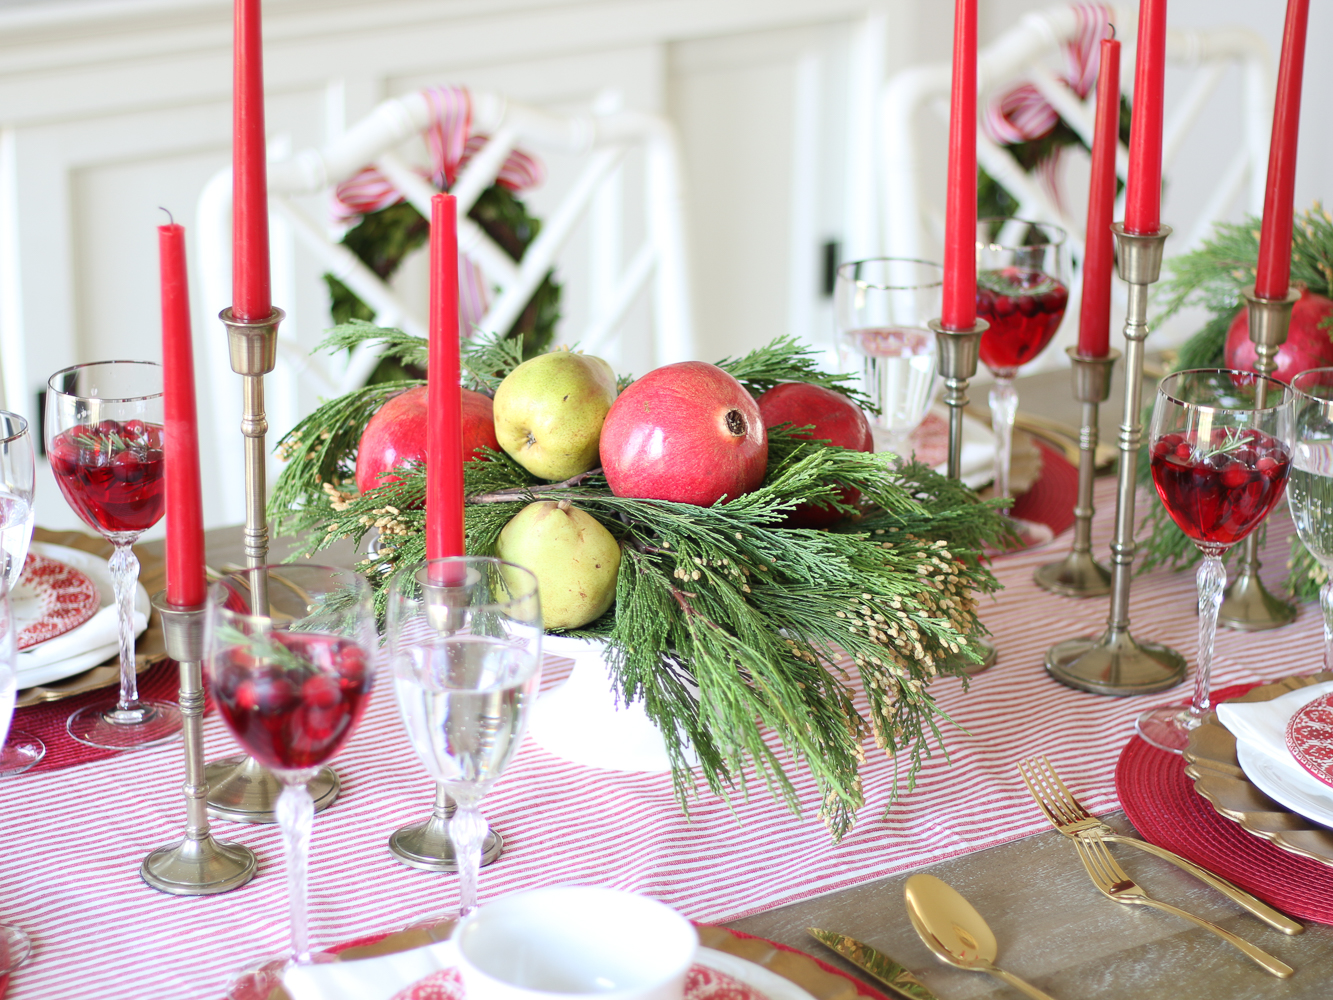 Christmas tablescape, red tapered candles, centerpieces with greenery, pomegranates and pears, crystal glassware with holiday cocktails, striped table runner, Chippendale chairs with boxwood wreaths